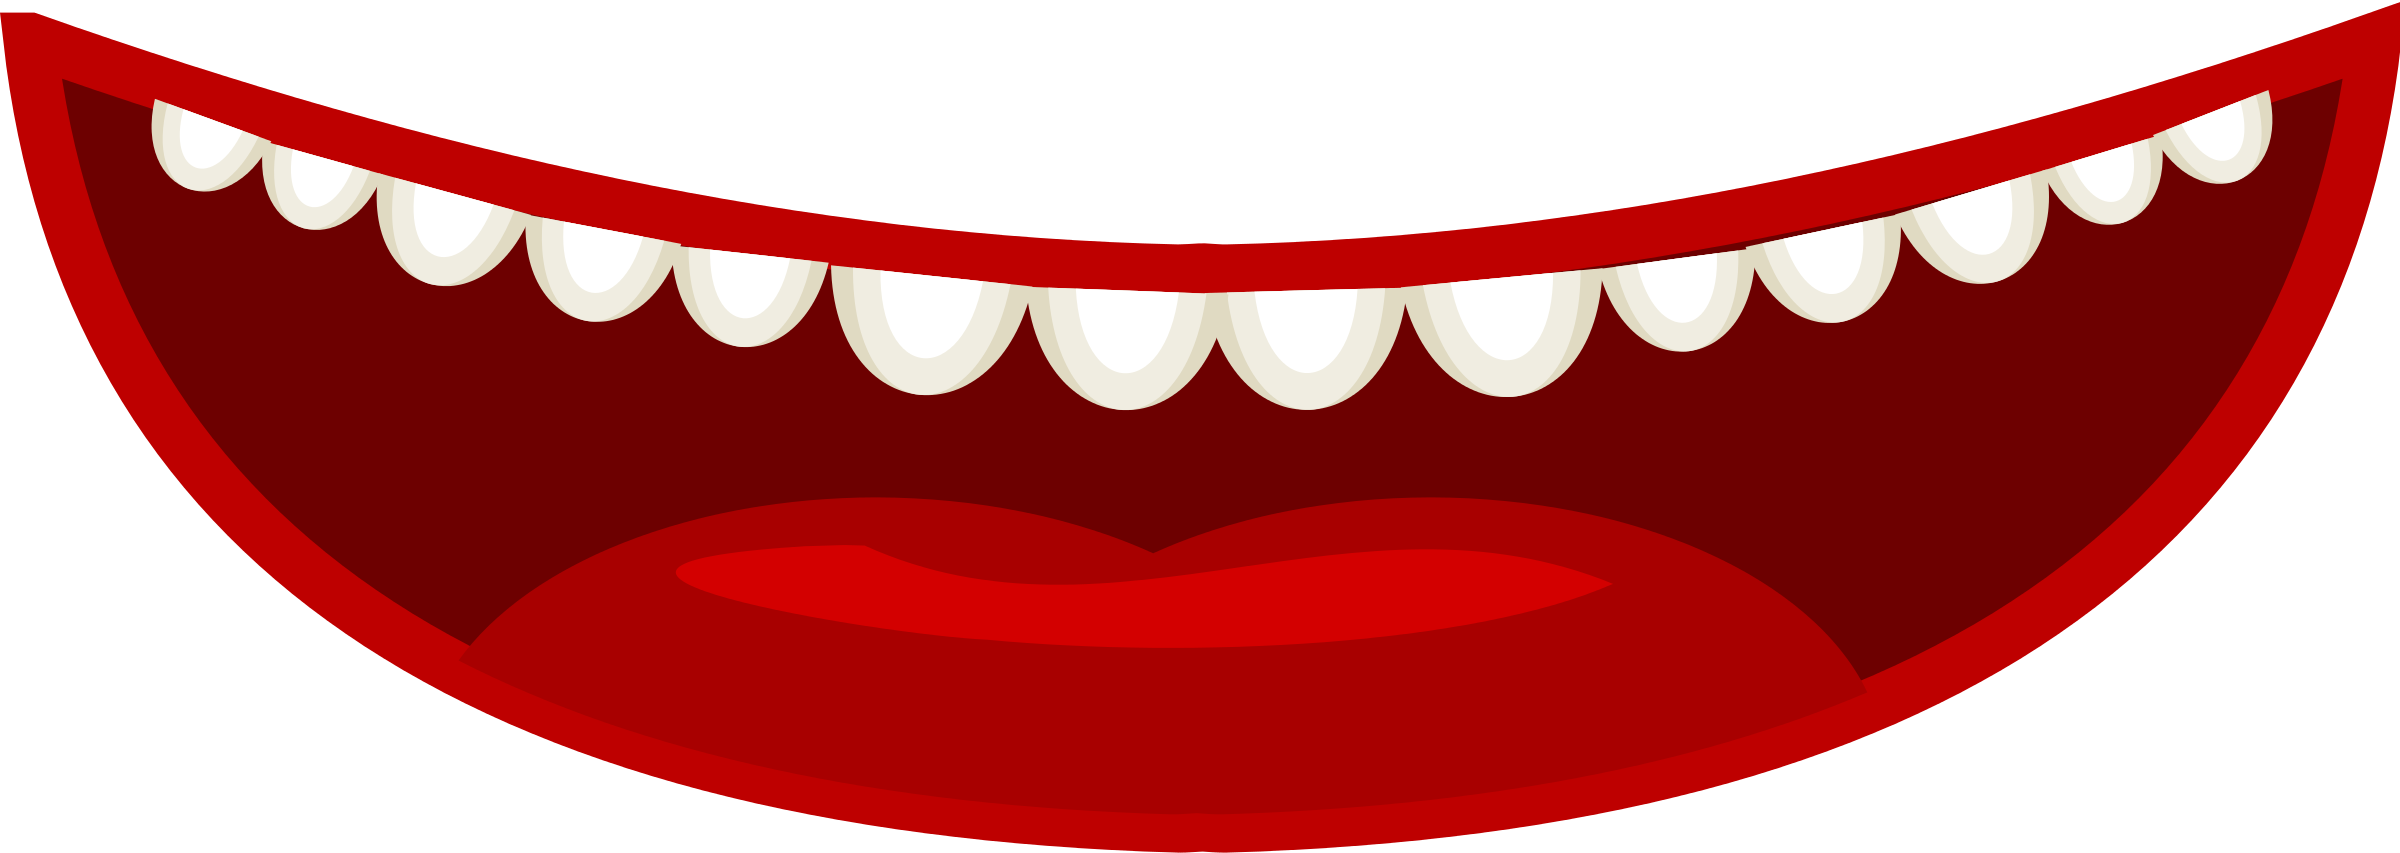 Free Mouth Clipart Transparent, Download Free Mouth Clipart Transparent